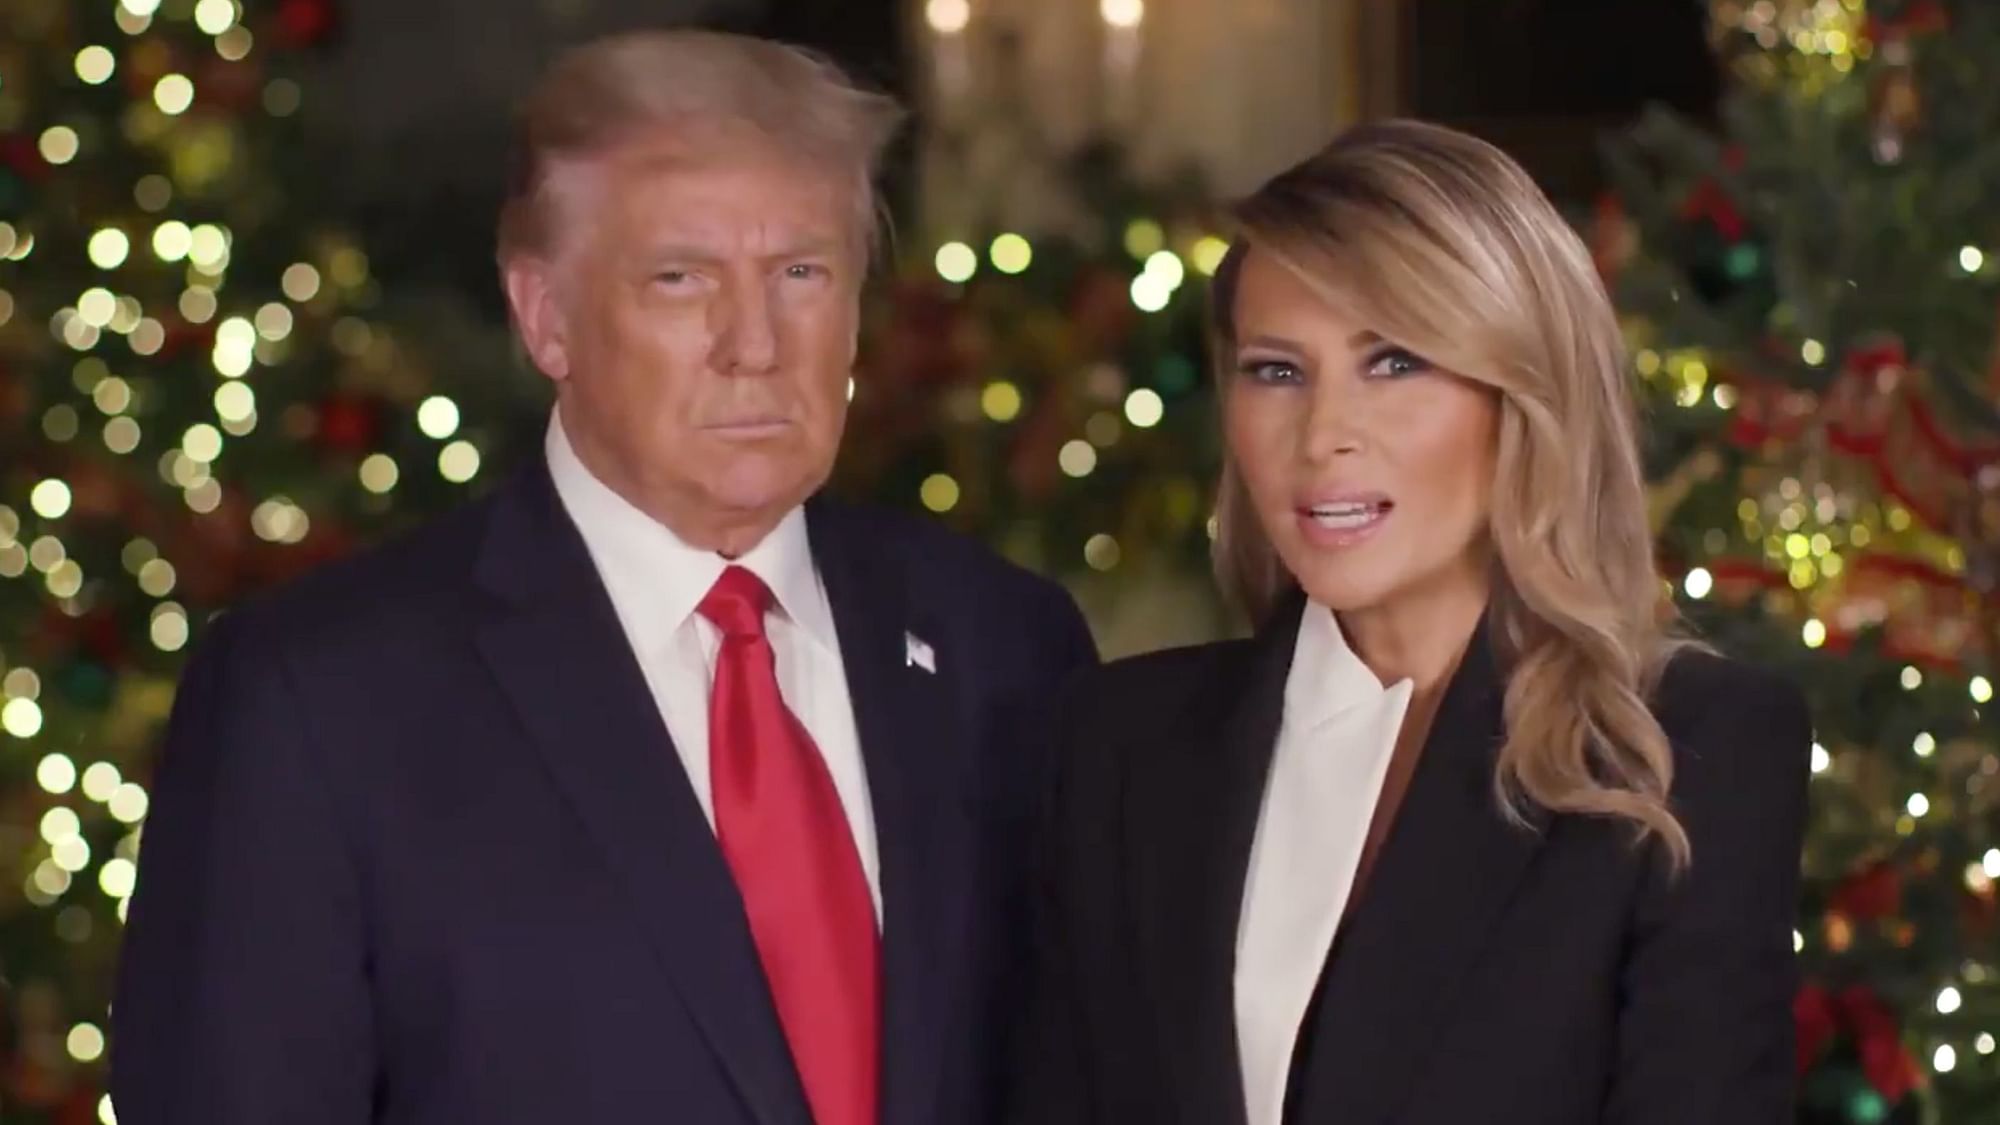 President Donald Trump and first lady Melania Trump delivered their final Christmas message on Thursday, wishing everyone a “very merry Christmas.”